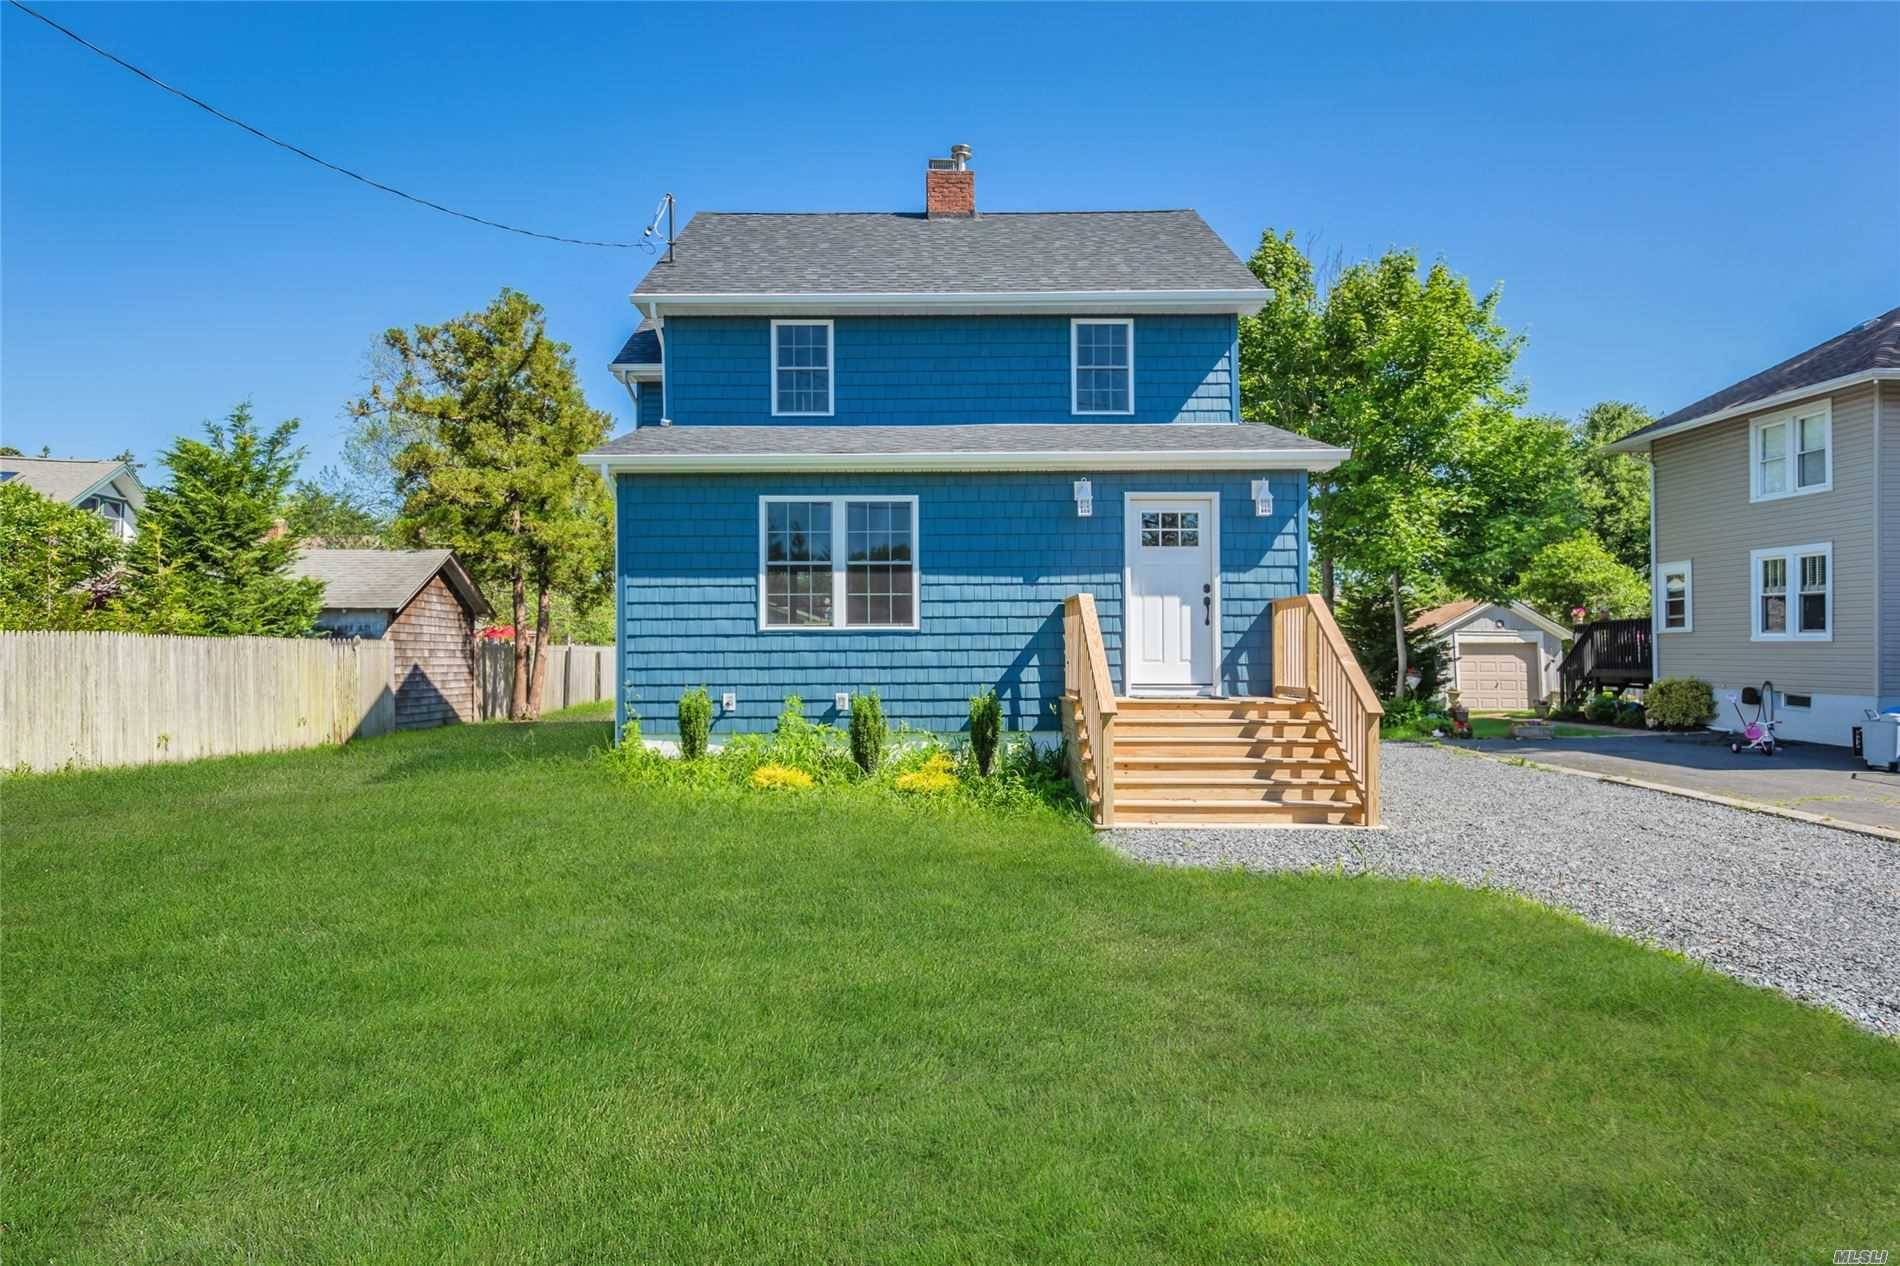 This Completely Remodeled South Sayville Colonial Offers A Gorgeous EIK w Quartz Counters, SS Appliances, Farm Sink Center Island, Living Room, Formal Dining Room, Fireplace, New Hardwood Floors Up Down, ...